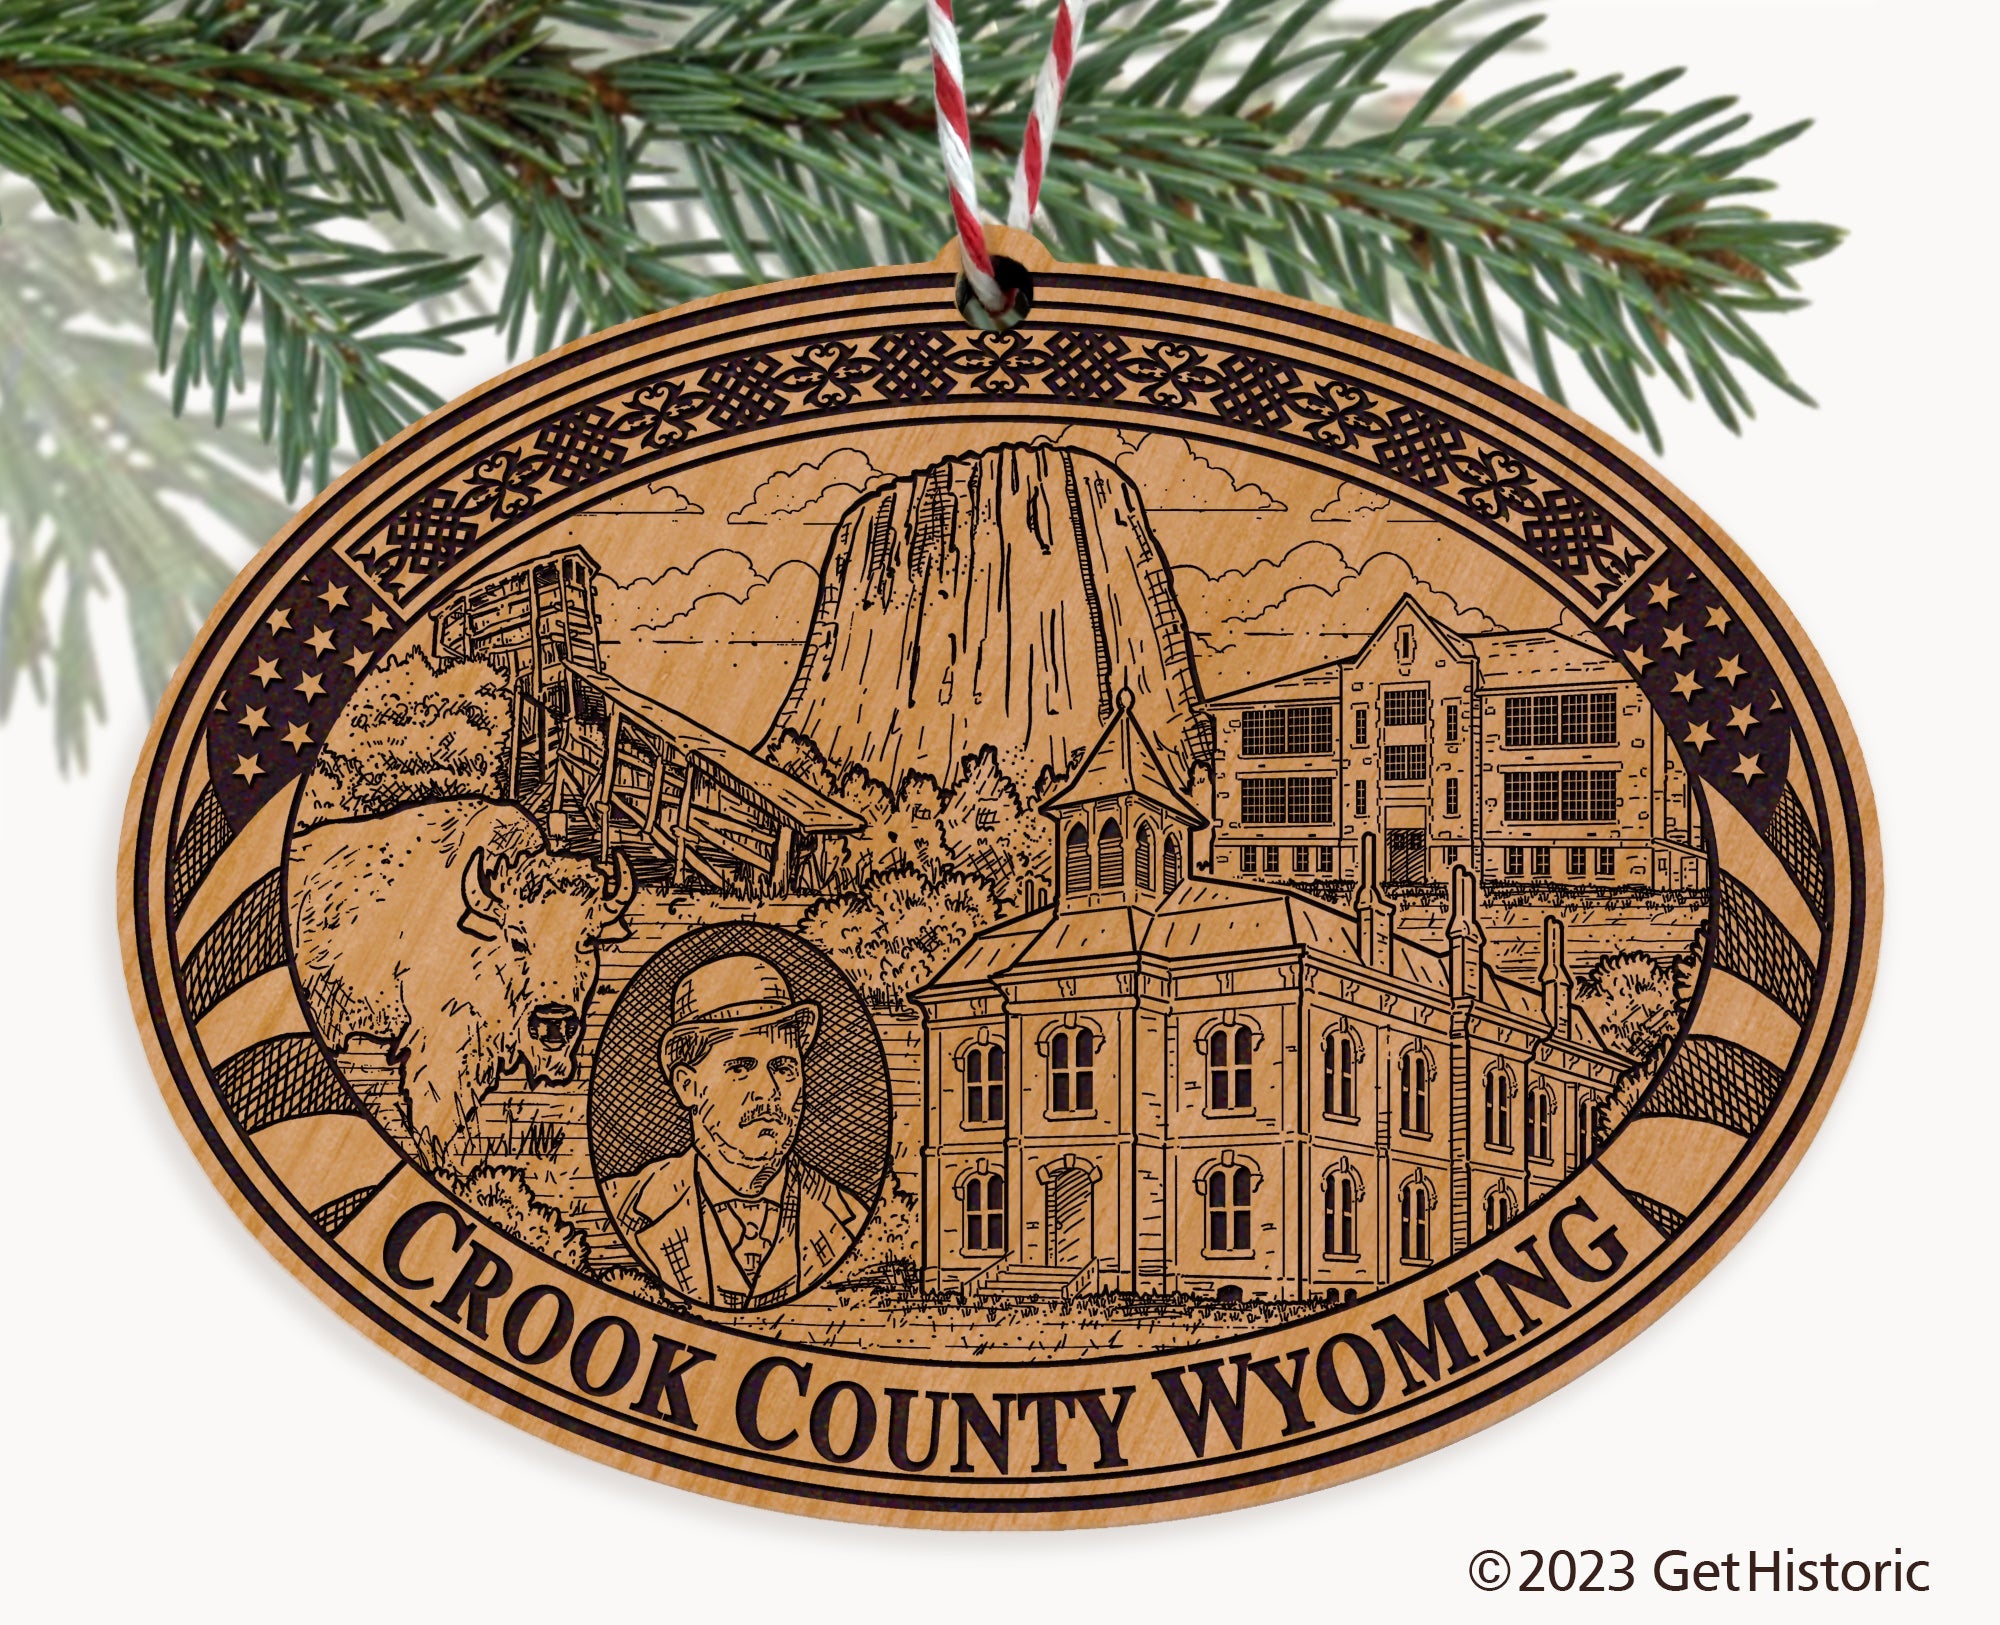 Crook County Wyoming Engraved Natural Ornament